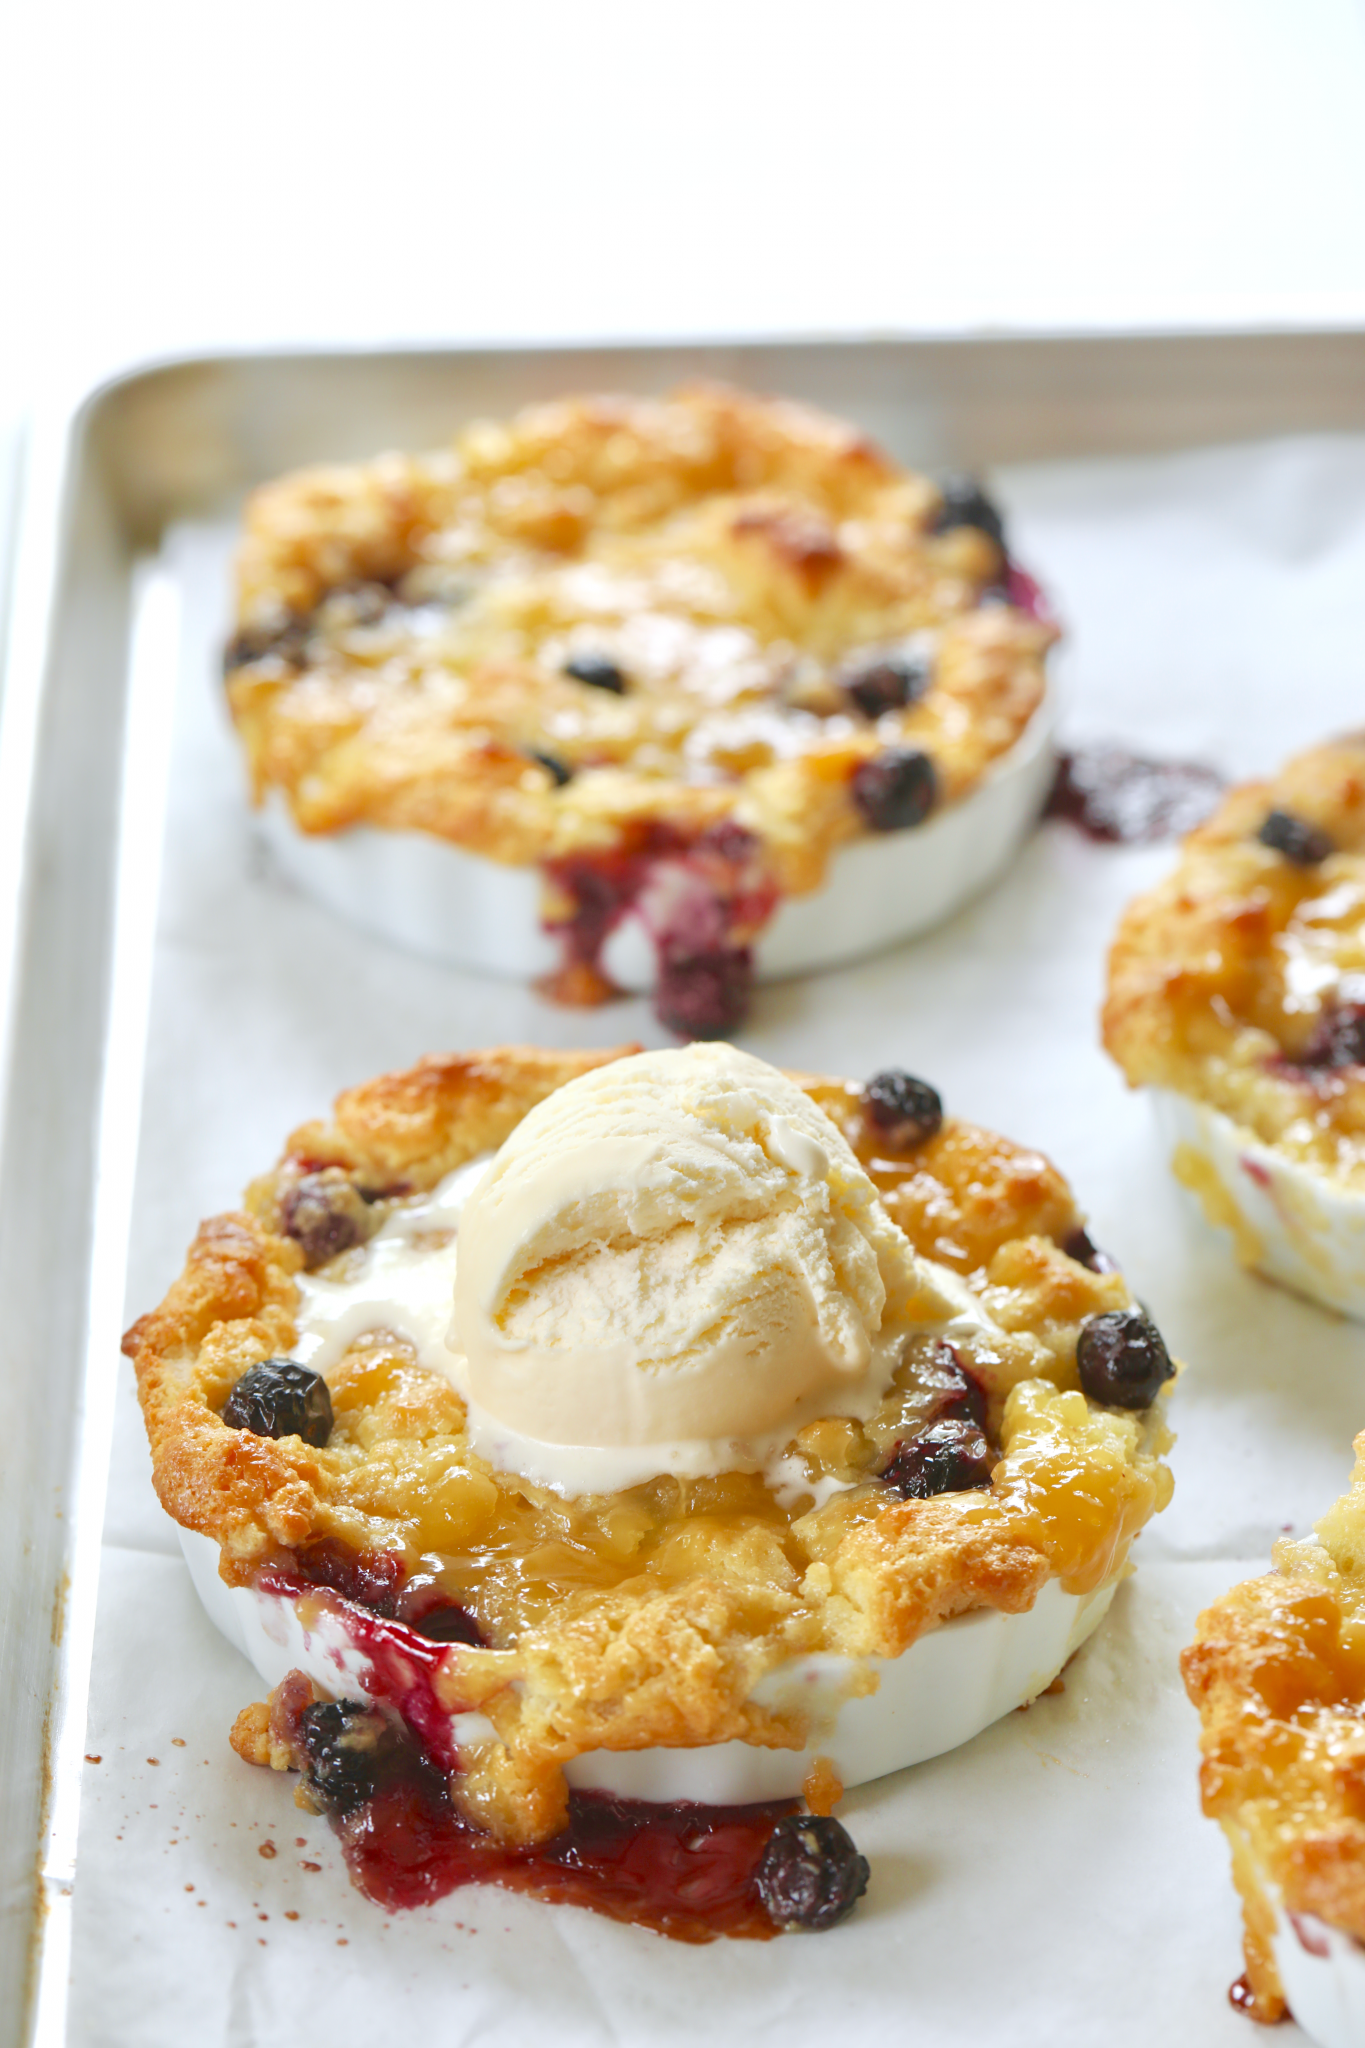 A tray of individual blueberry and lemon bread puddings, topped with ice cream.